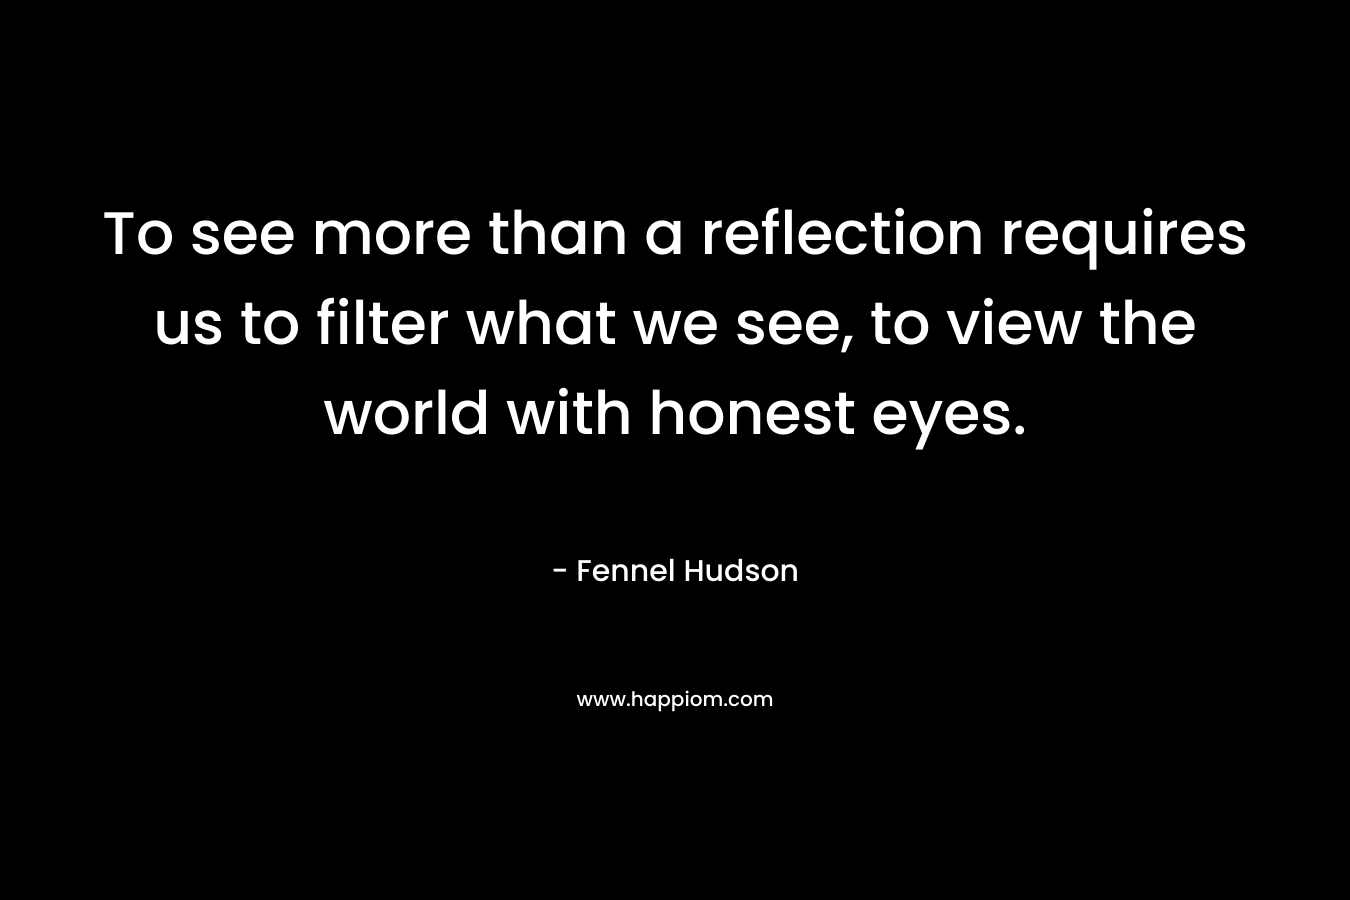 To see more than a reflection requires us to filter what we see, to view the world with honest eyes.